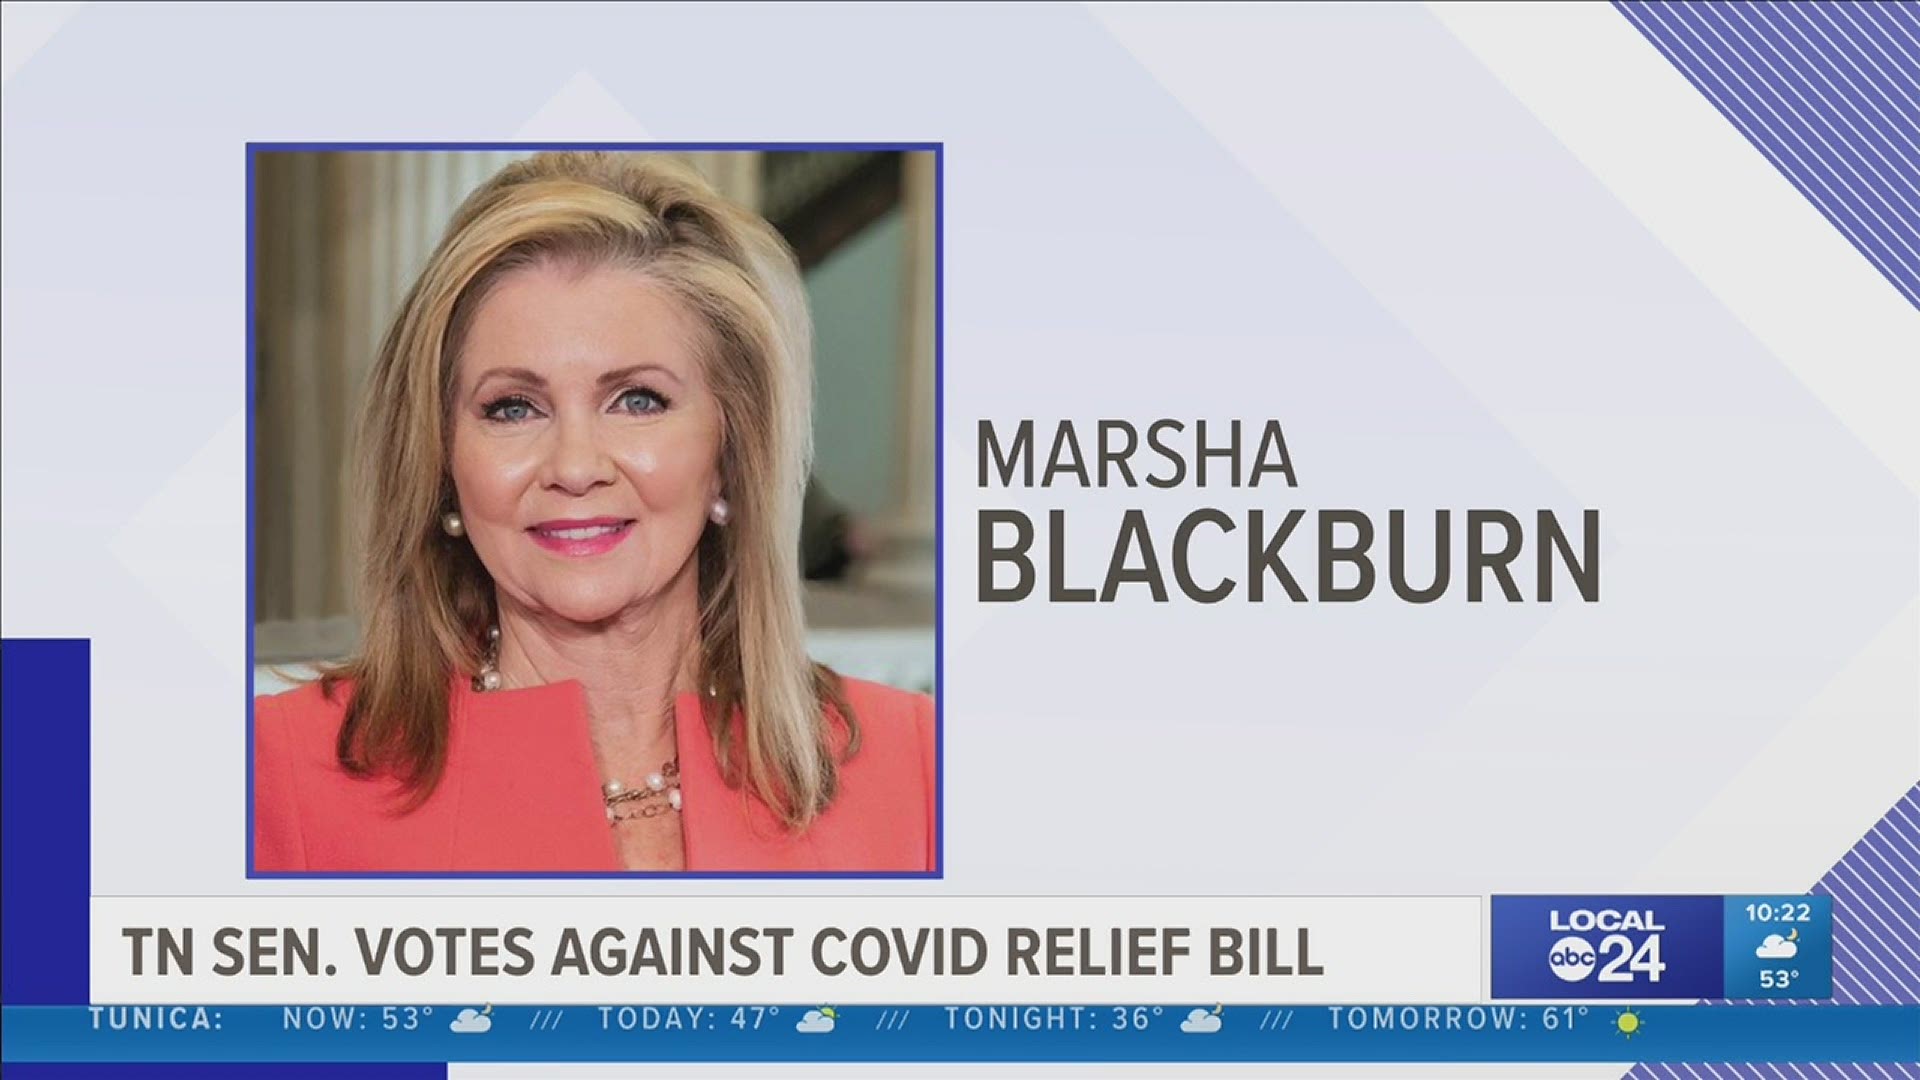 Local 24 News Anchor Richard Ransom discusses in his Ransom Note about Marsha Blackburn voting against the Stimulus Relief Package.